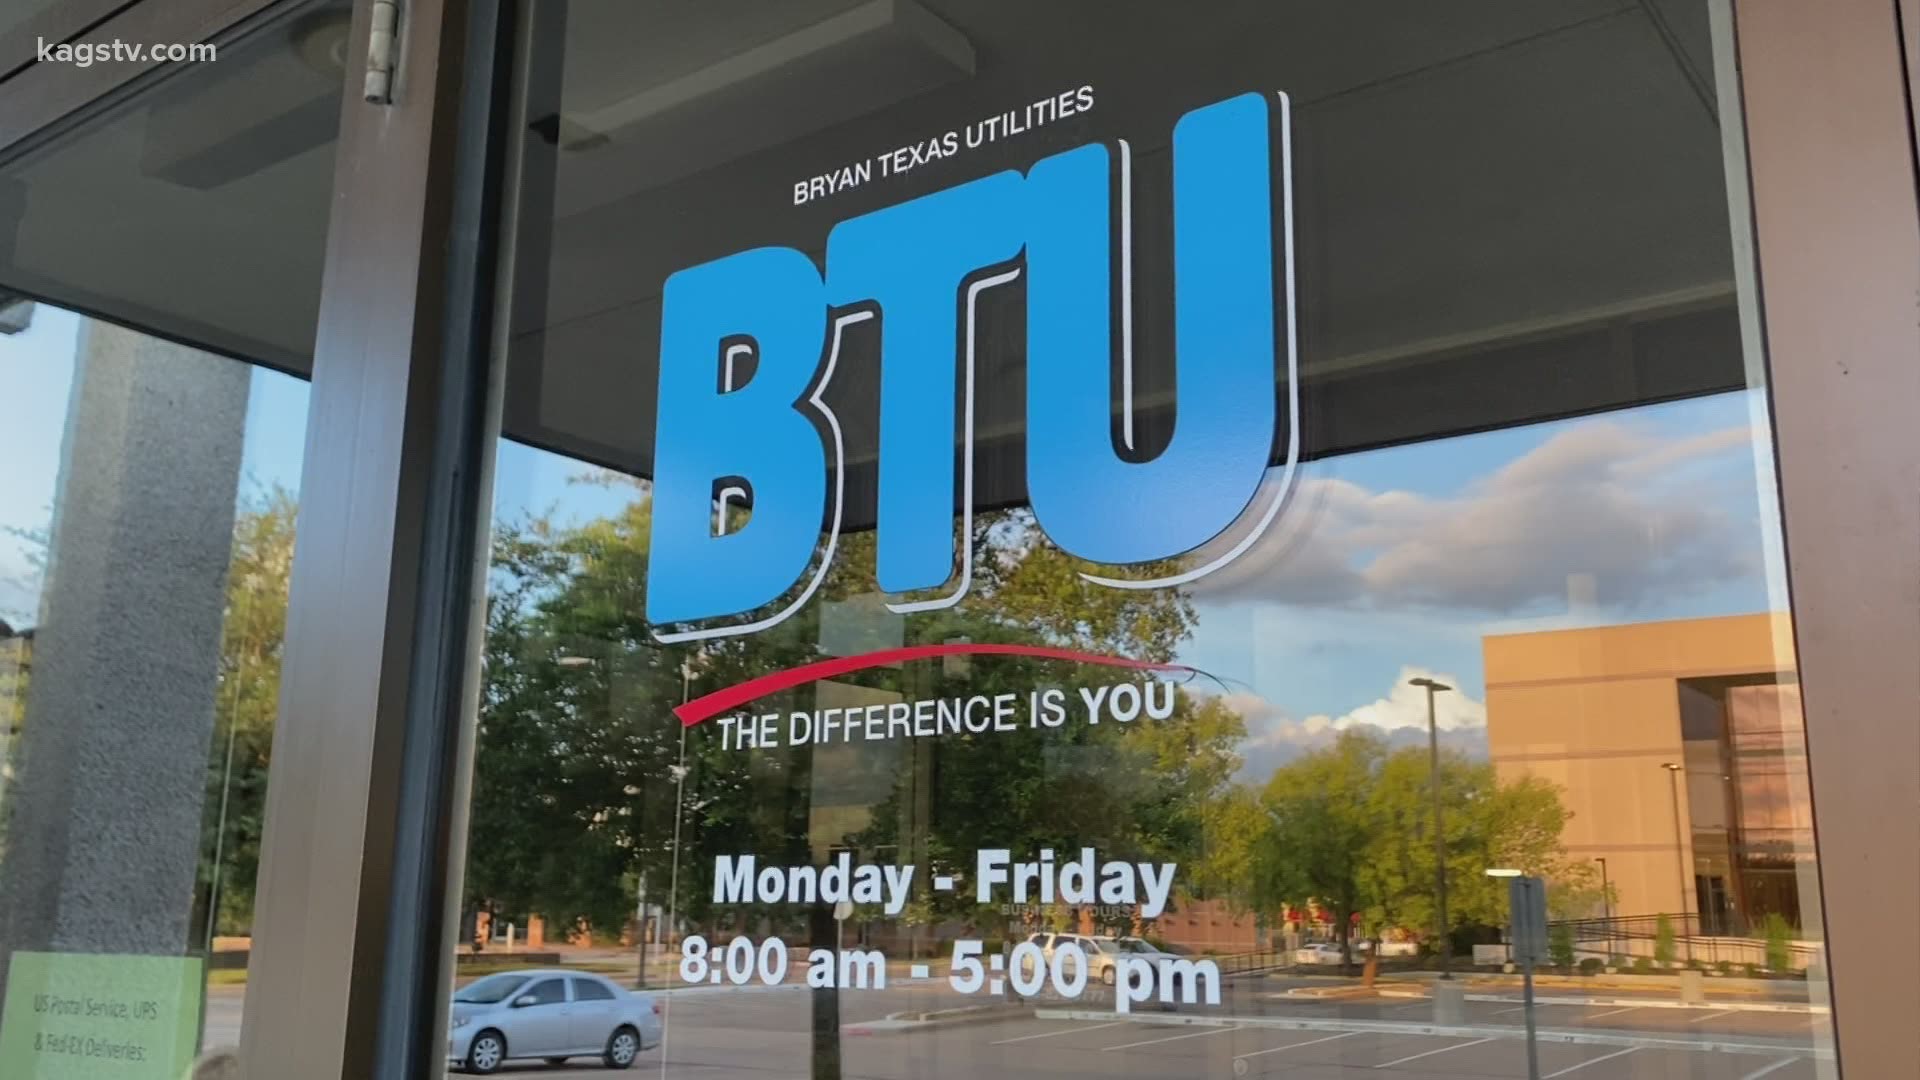 BTU says over 200K in grants available to help customers in need